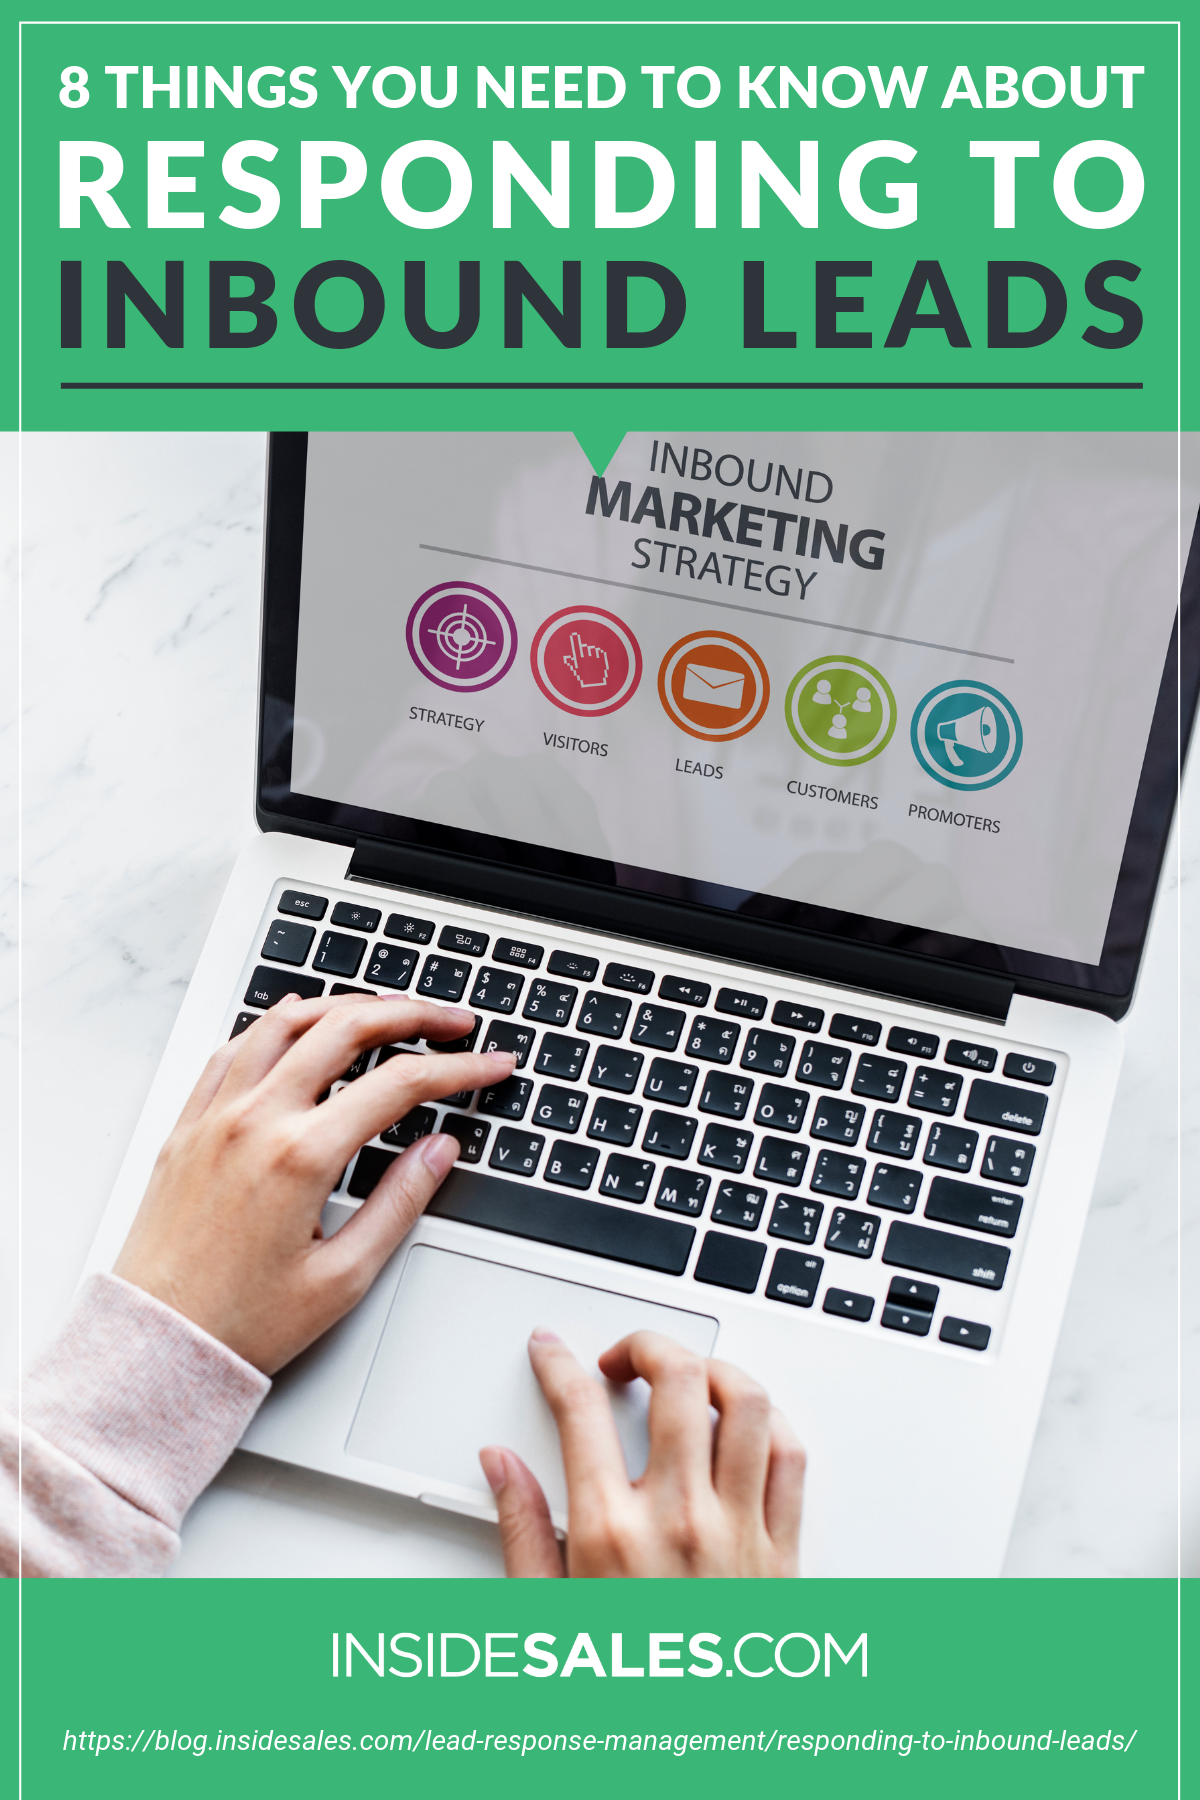 8 Things You Need To Know About Responding To Inbound Leads https://resources.insidesales.com/blog/lead-response-management/responding-to-inbound-leads/